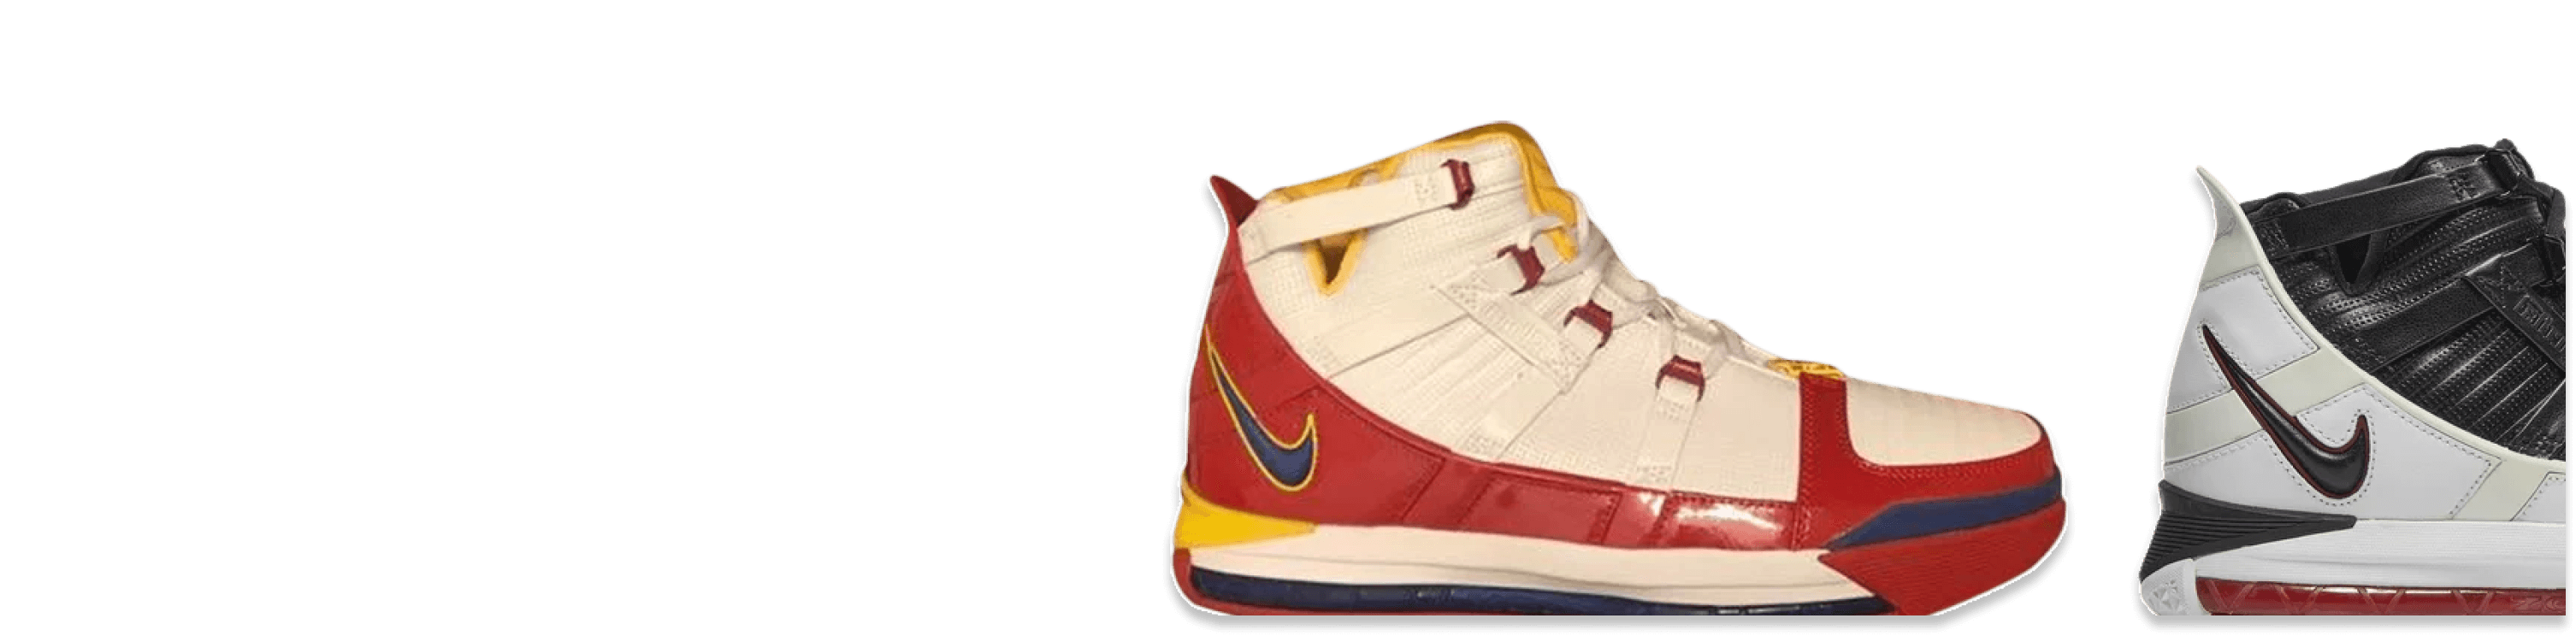 Nike LeBron 3 “Houston Oilers” PE to Get First-Ever Release on June 23rd